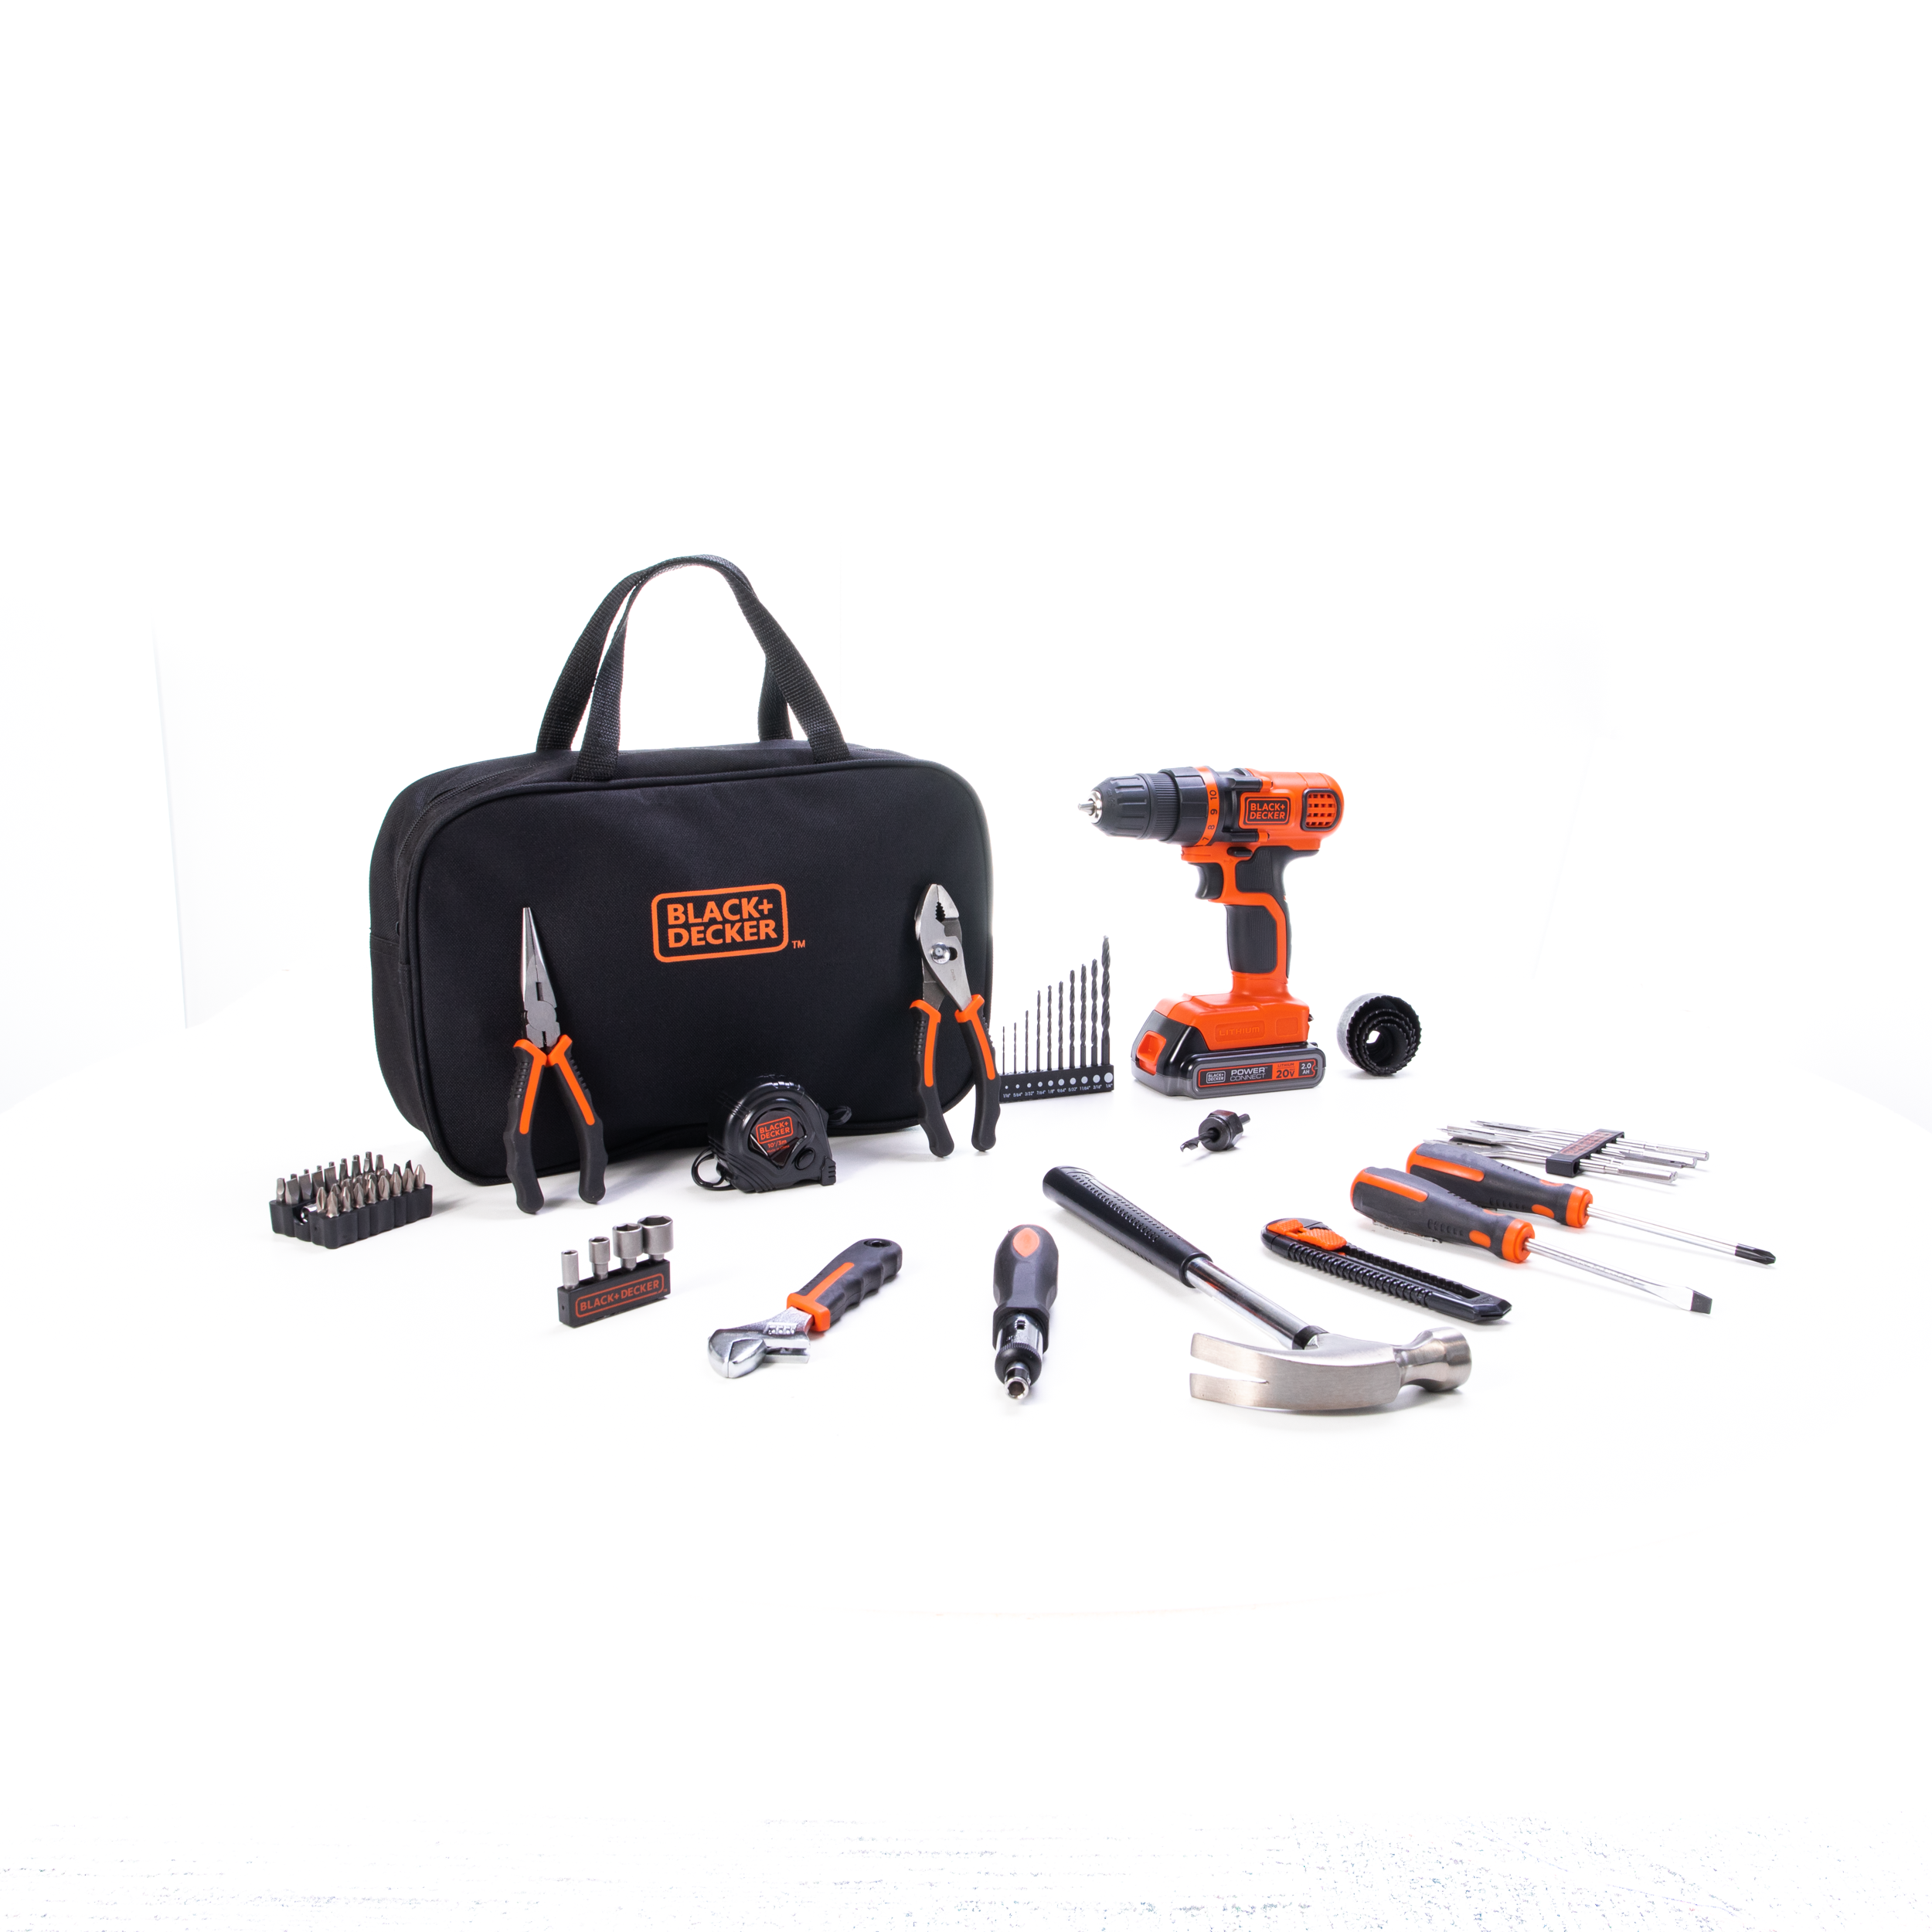 beyond by BLACK DECKER Home Tool Kit with 20V MAX Drill Driver 83-Piece  (BDPK70284C1AEV) - Drills, Facebook Marketplace